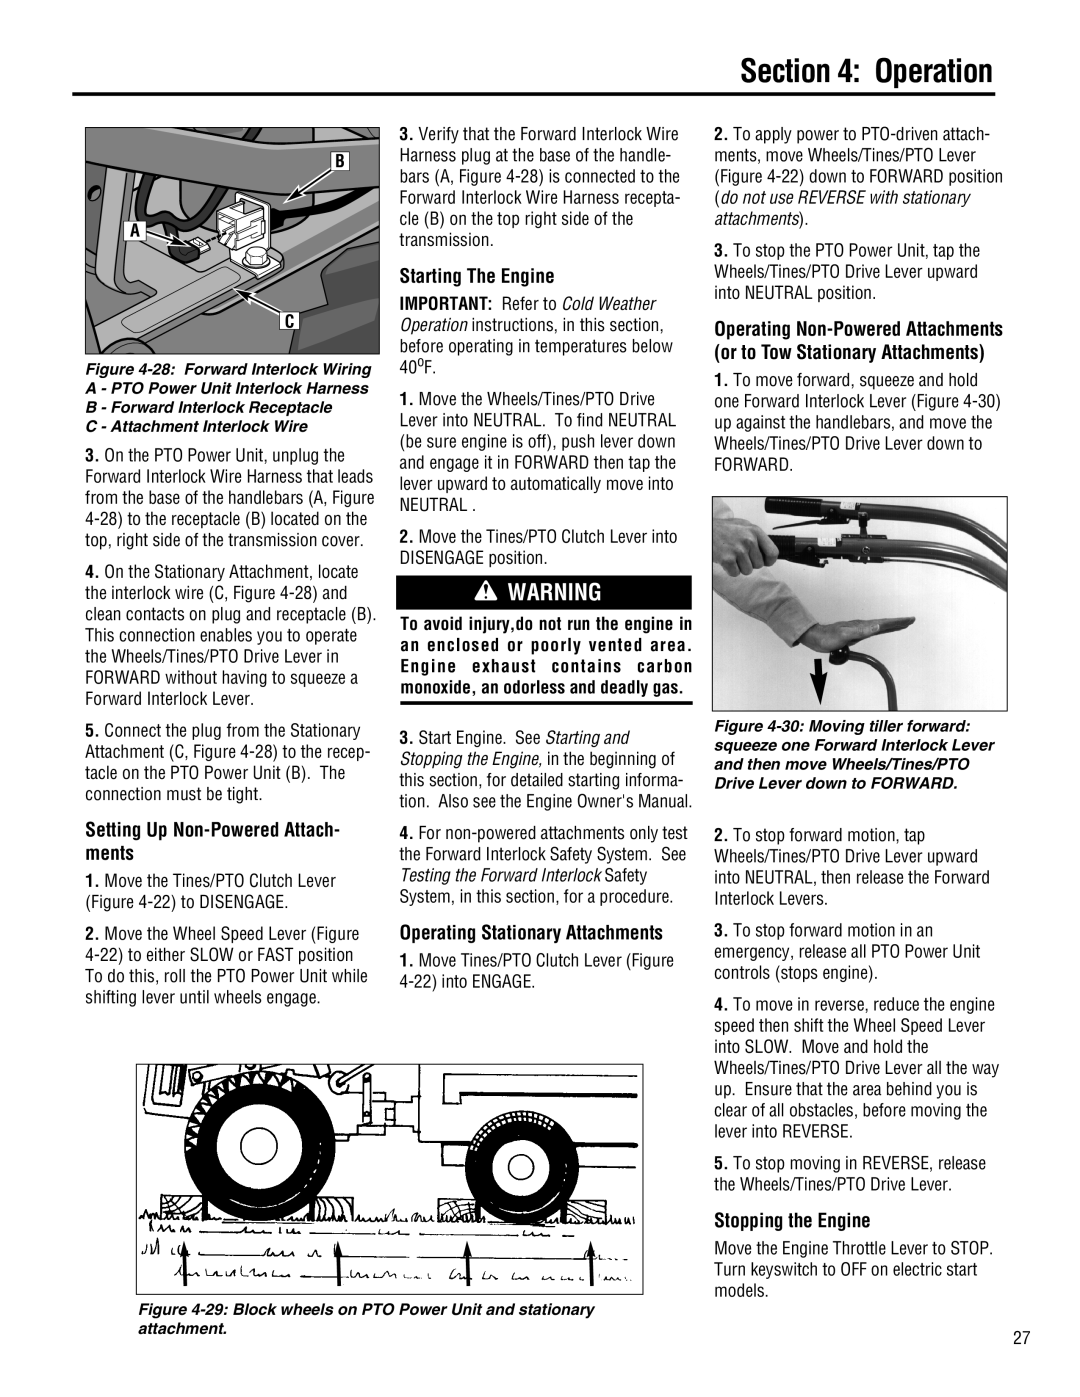 Troy-Bilt E682J-Horse manual Setting Up Non-Powered Attach- ments, Starting The Engine, Operating Stationary Attachments 